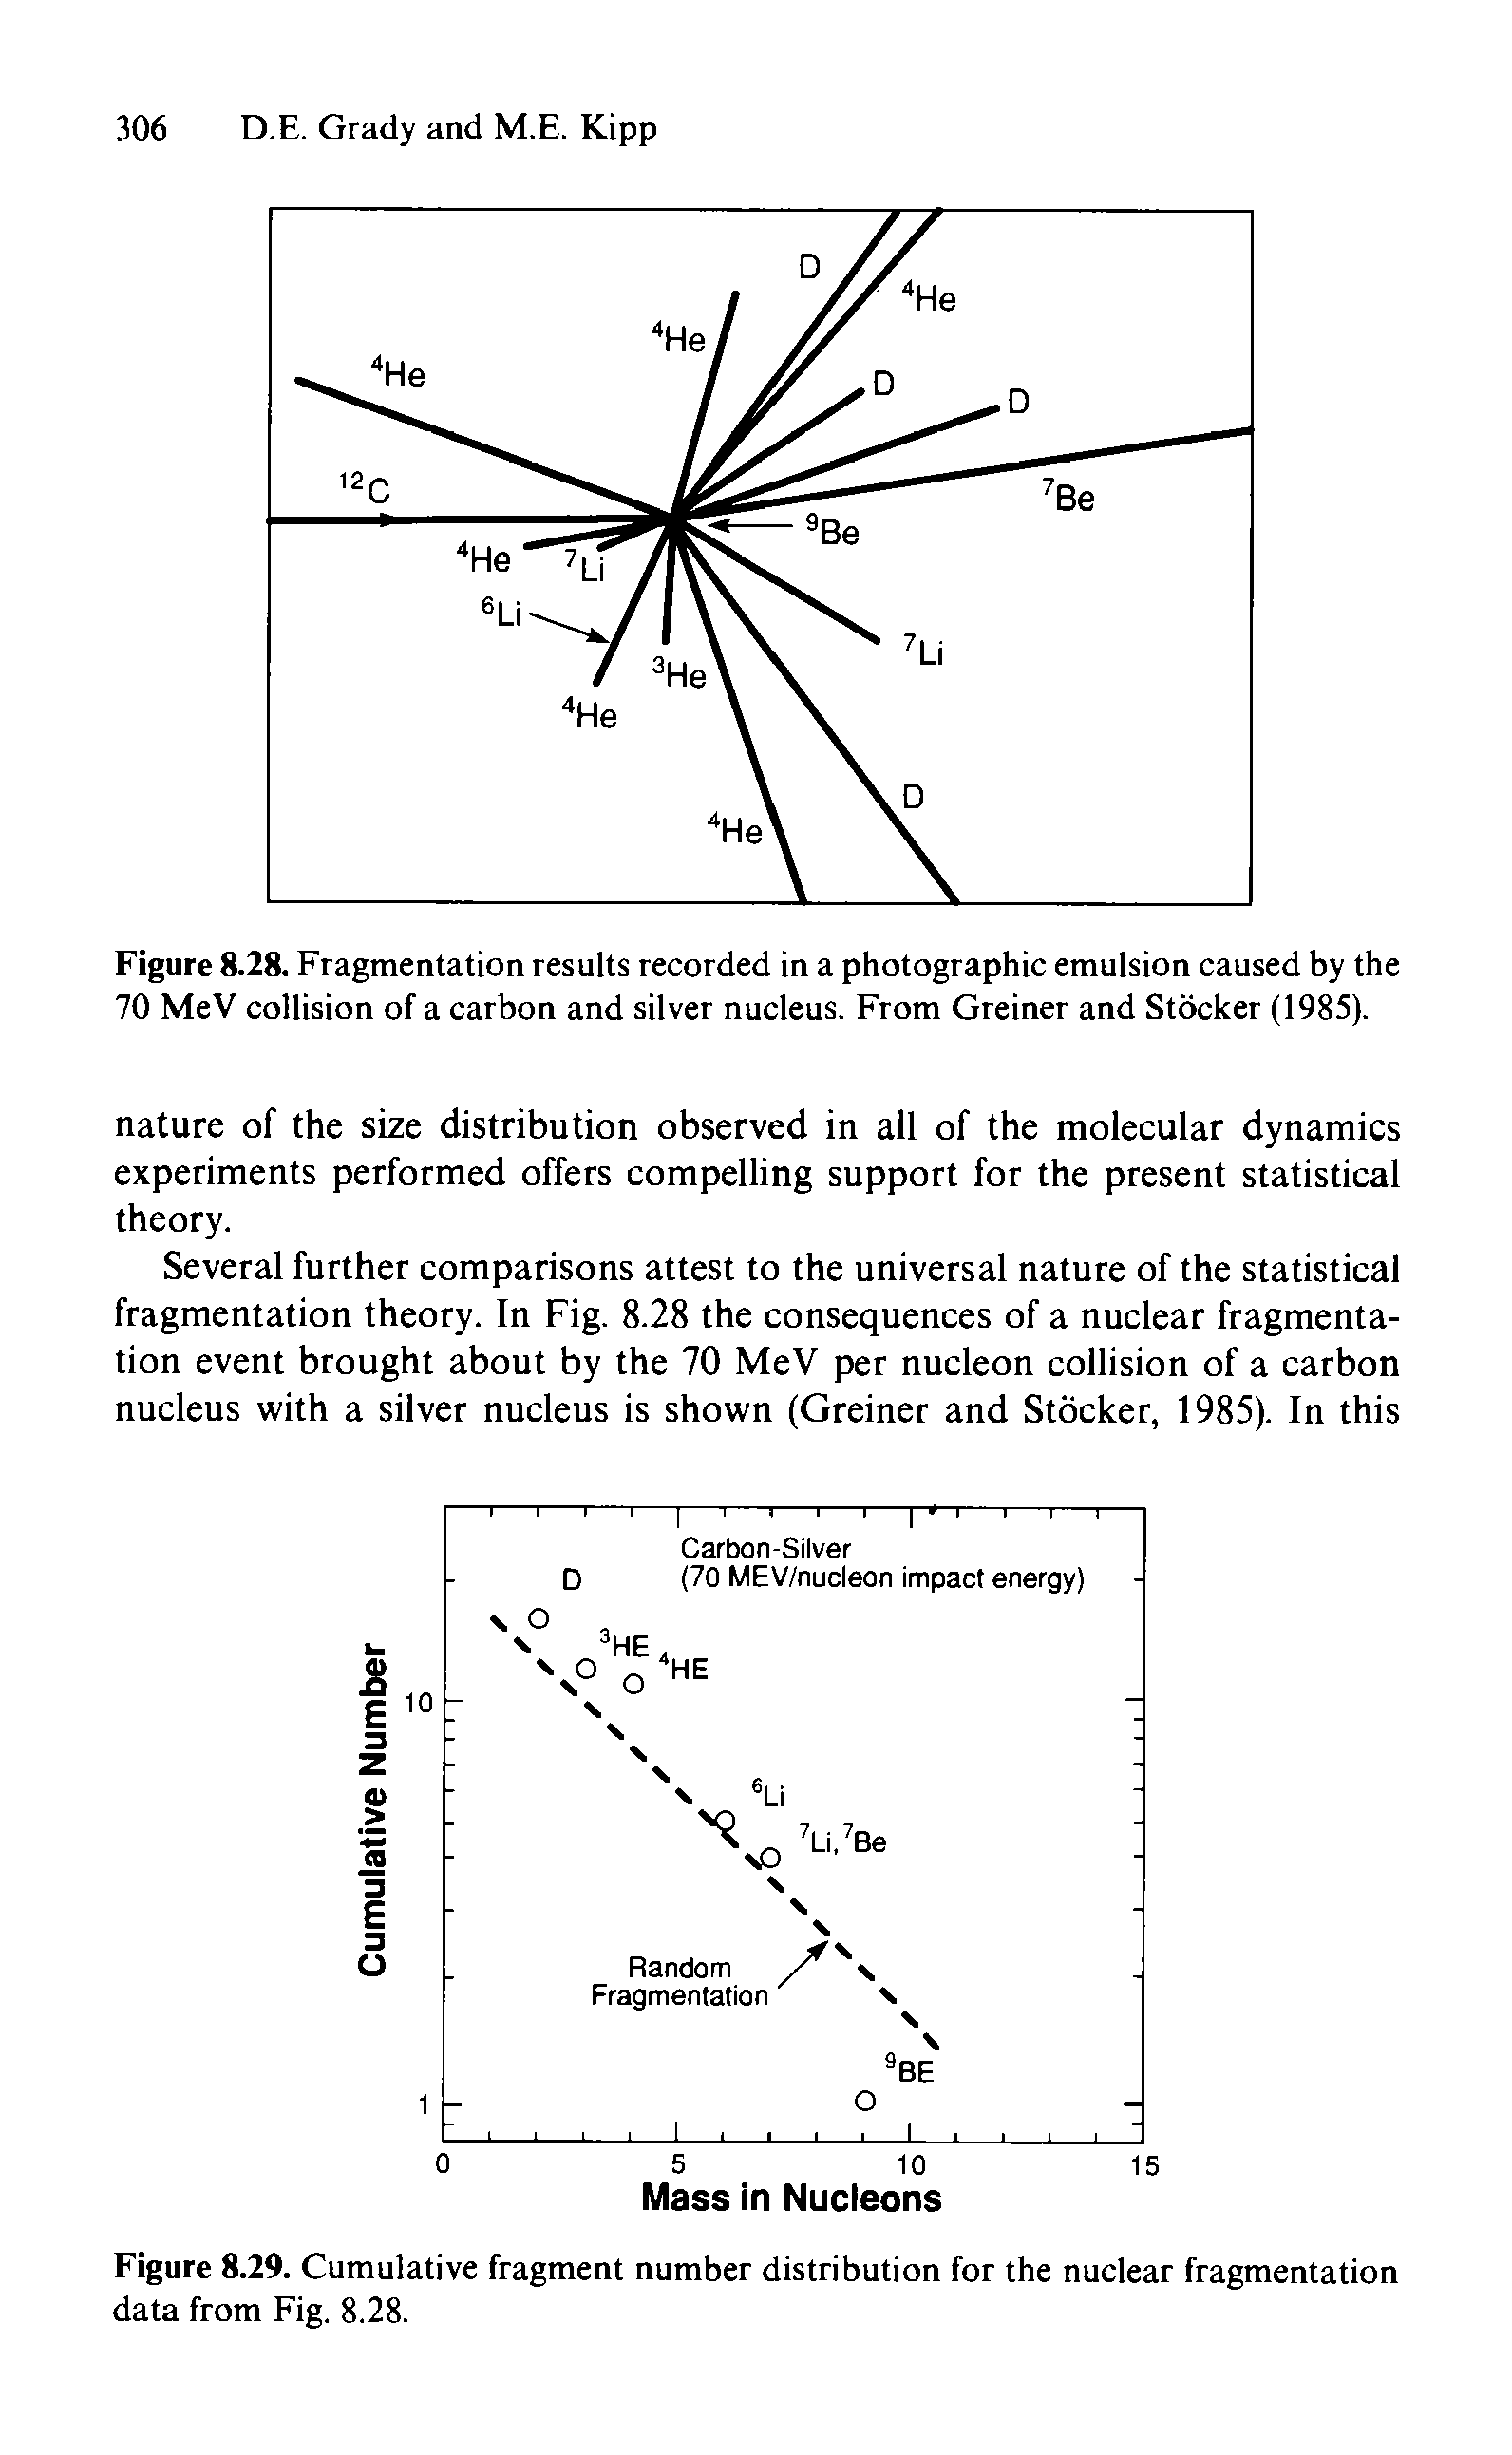 Figure 8.28. Fragmentation results recorded in a photographic emulsion caused by the 70 MeV collision of a carbon and silver nucleus. From Greiner and Stocker (1985).